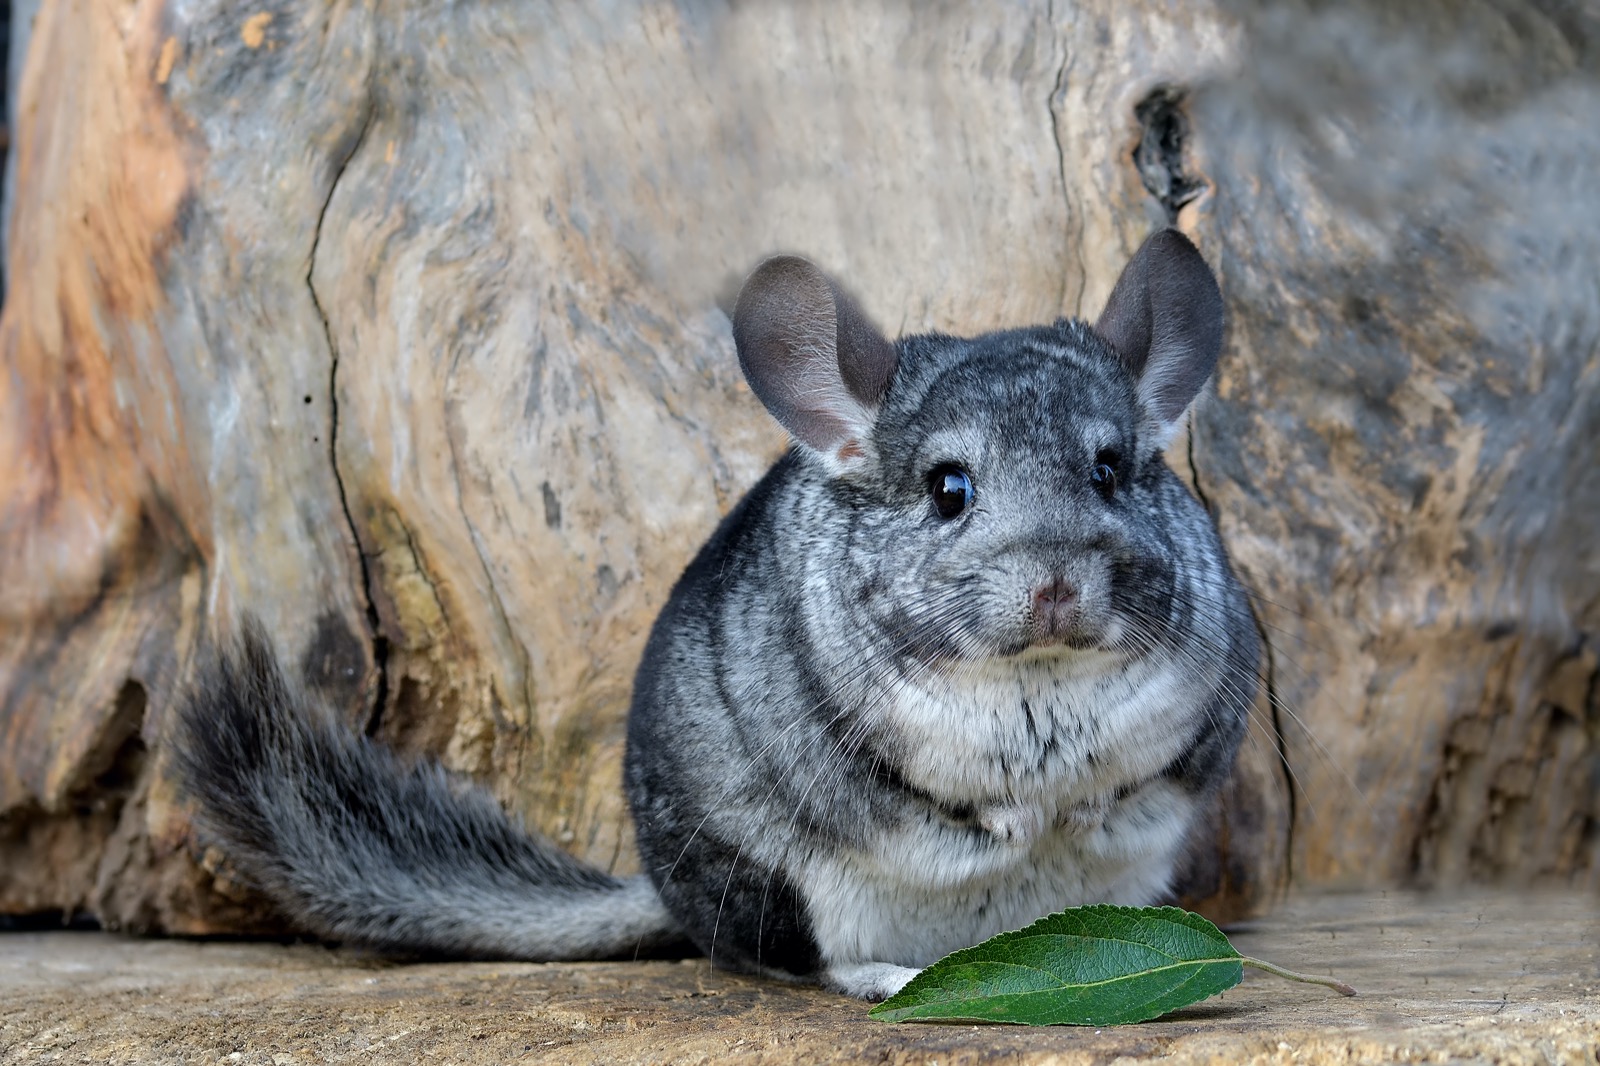 Can You Beat Your Friends in This Quiz That's All About Animals? Chinchilla